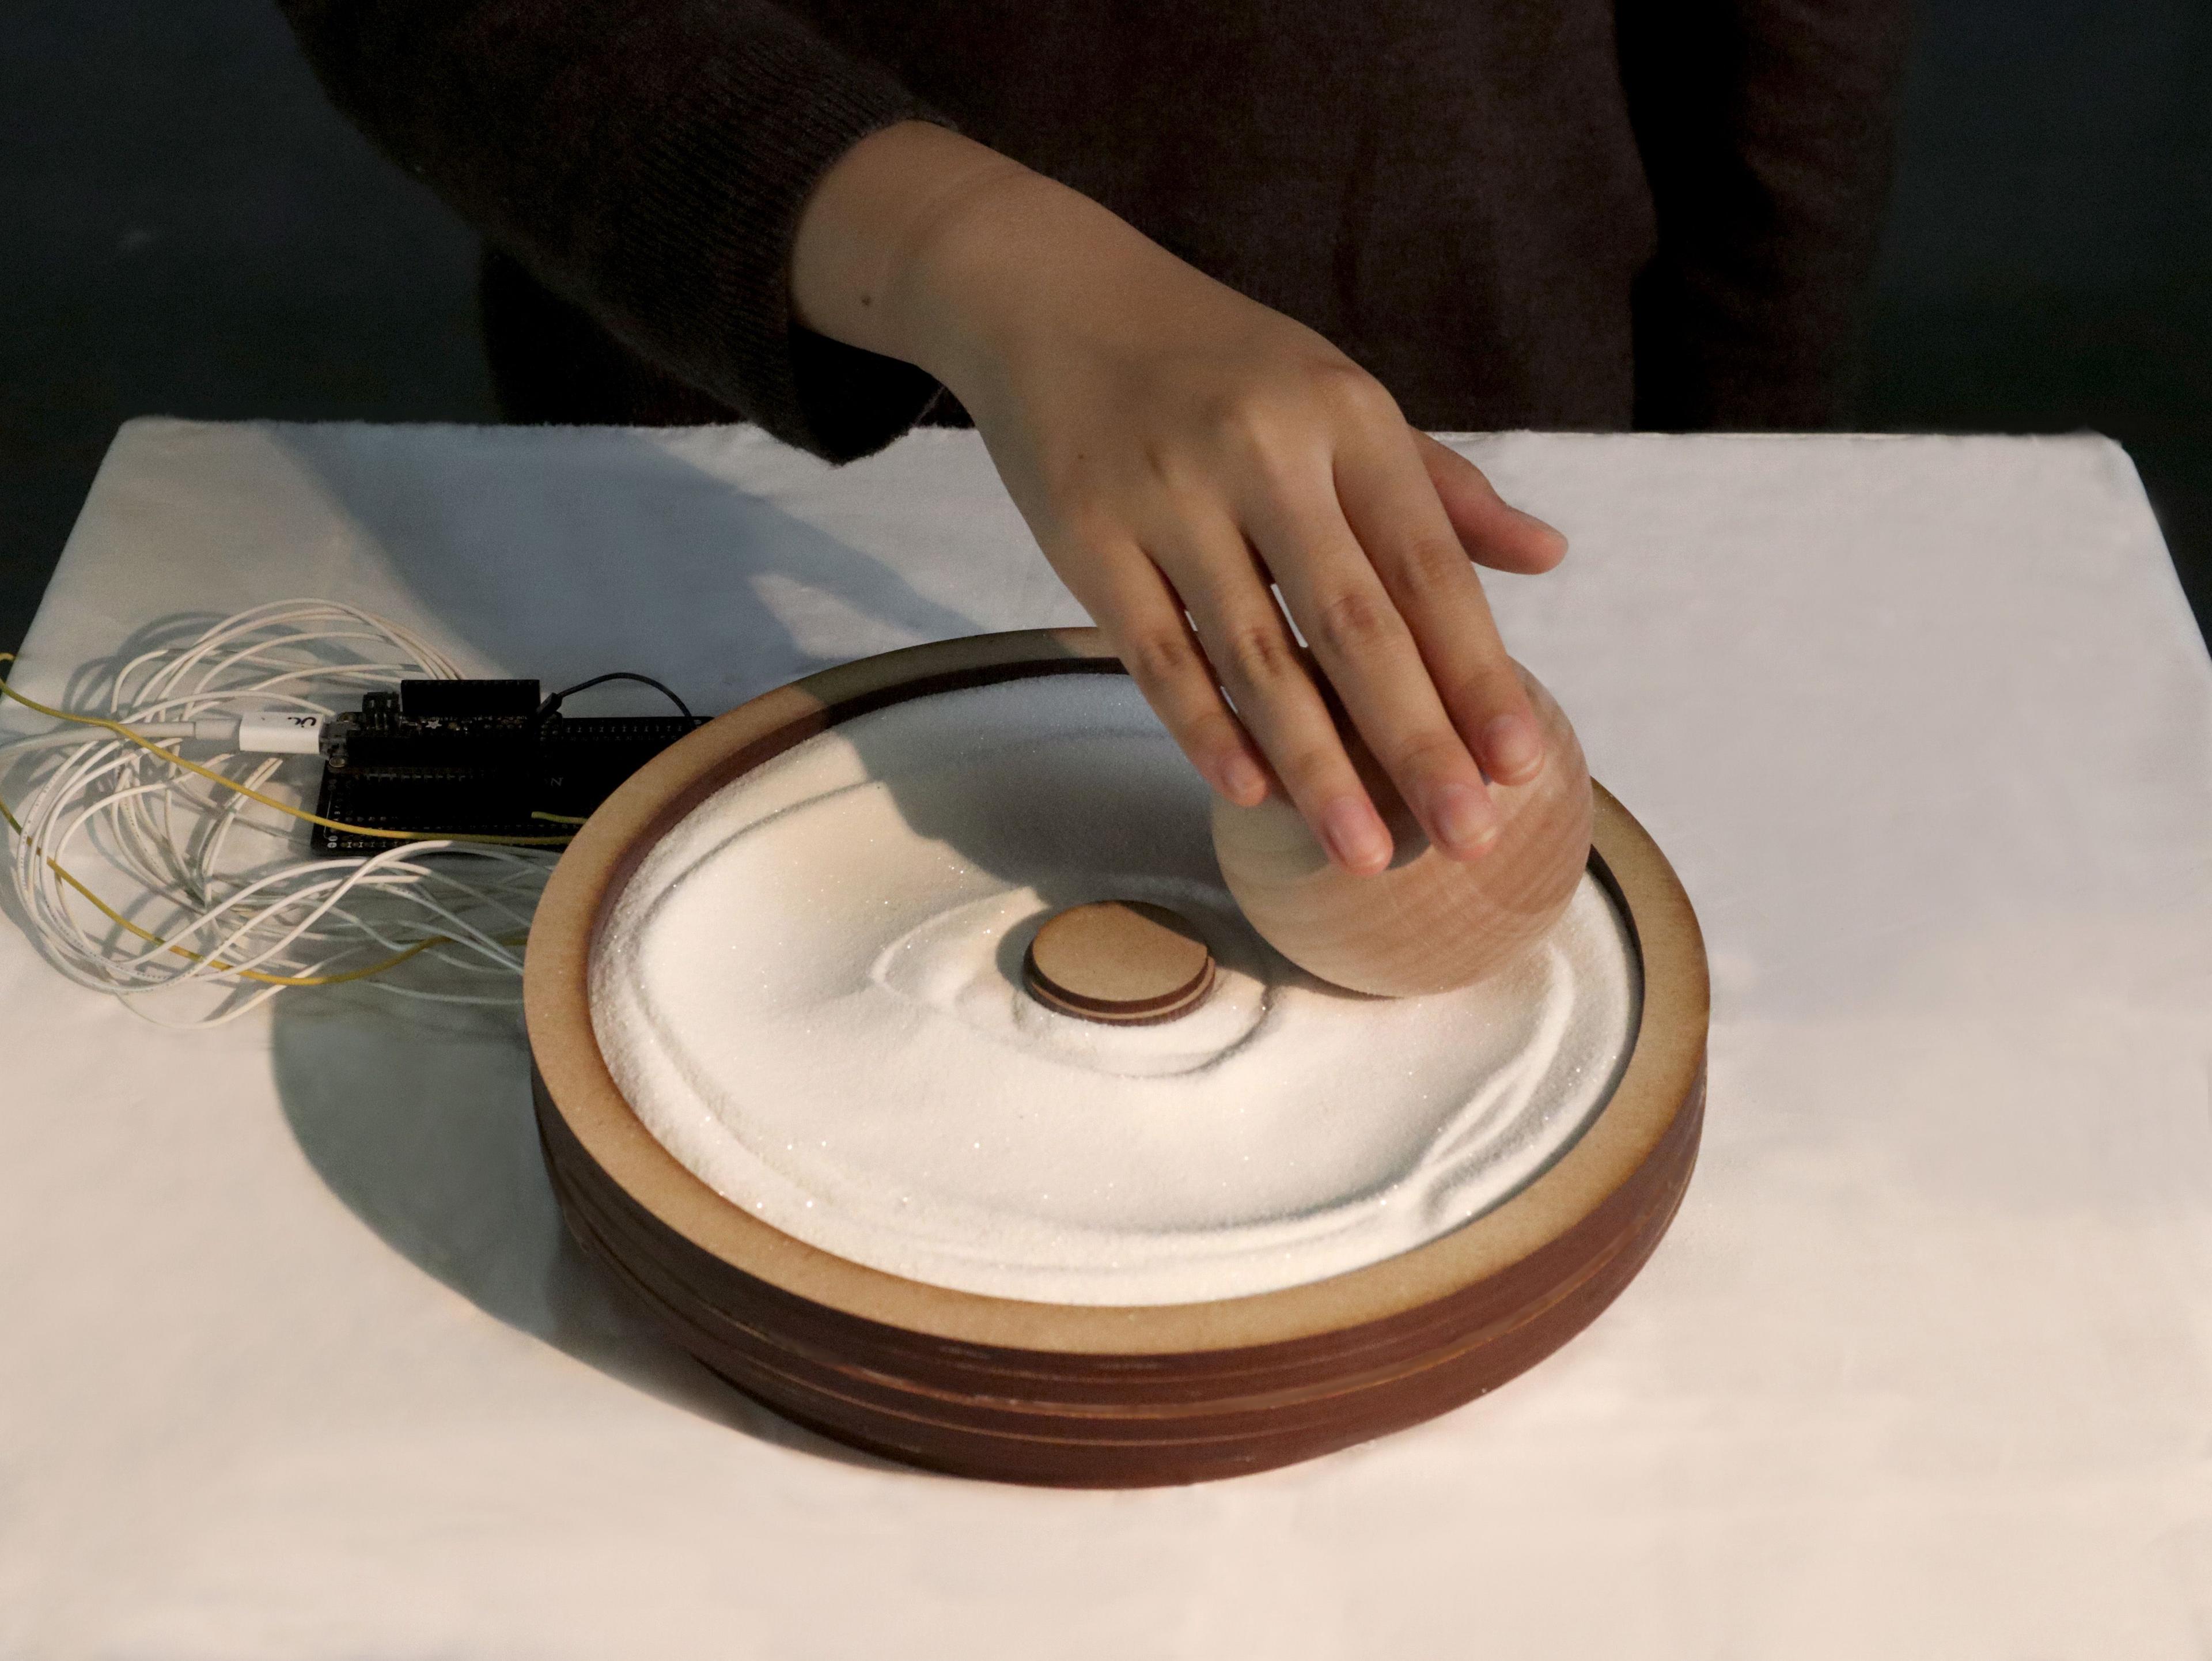 a round container of sand on a table. a hand is combing the sand with a wooden tool. there are wires coming from the sand vessel.